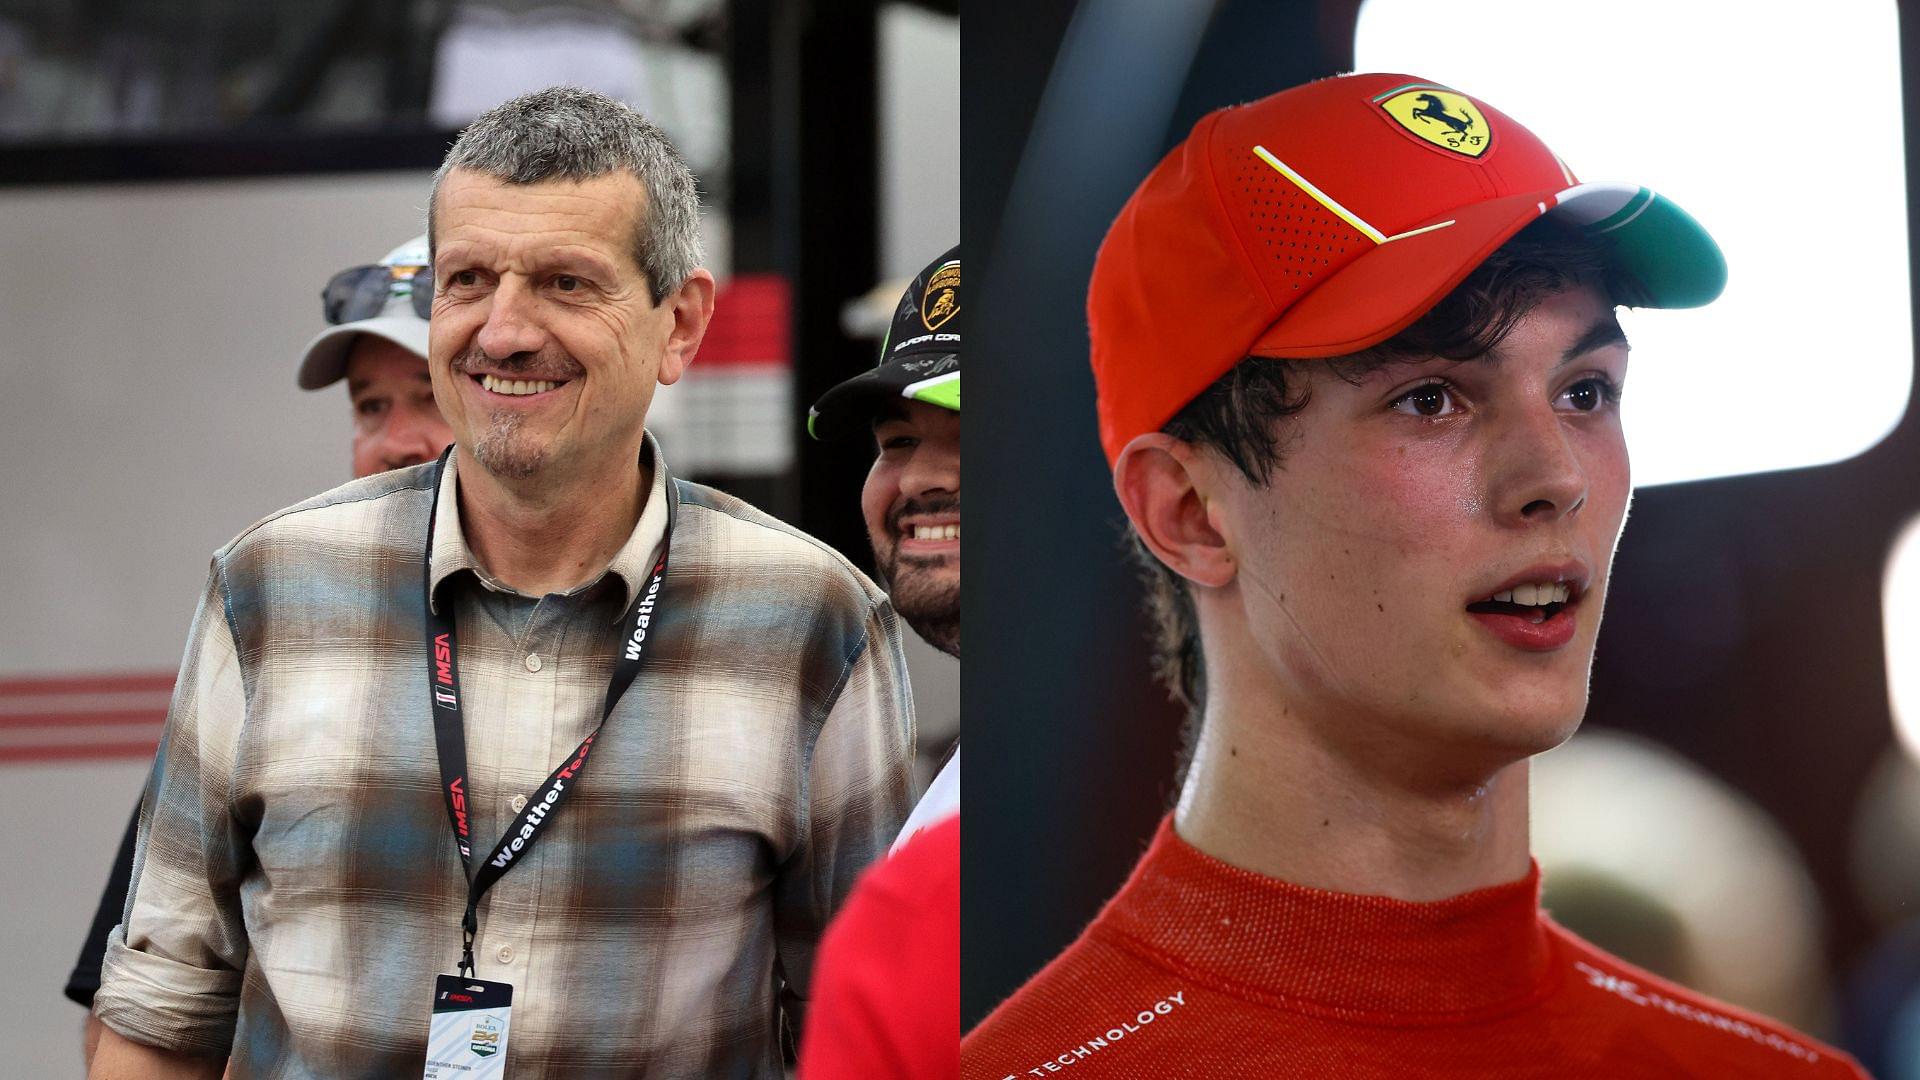 Guenther Steiner Warns Haas Of Welcoming "Next Max Verstappen" Ollie Bearman to F1 Empty Seat